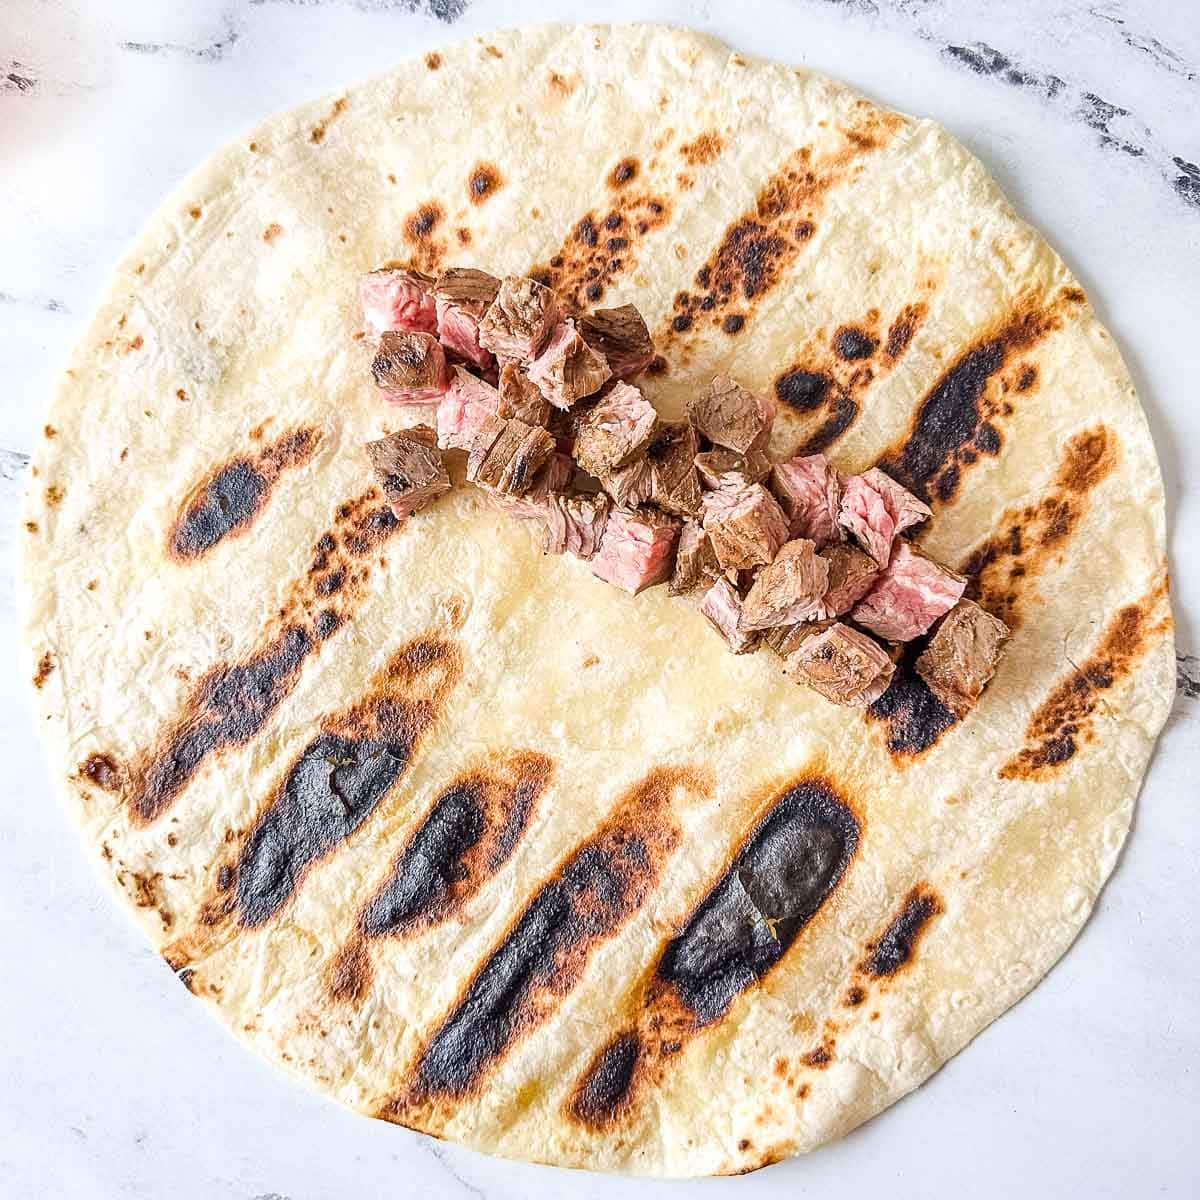 Diced carne asada pieces sit on top of a grilled tortilla.